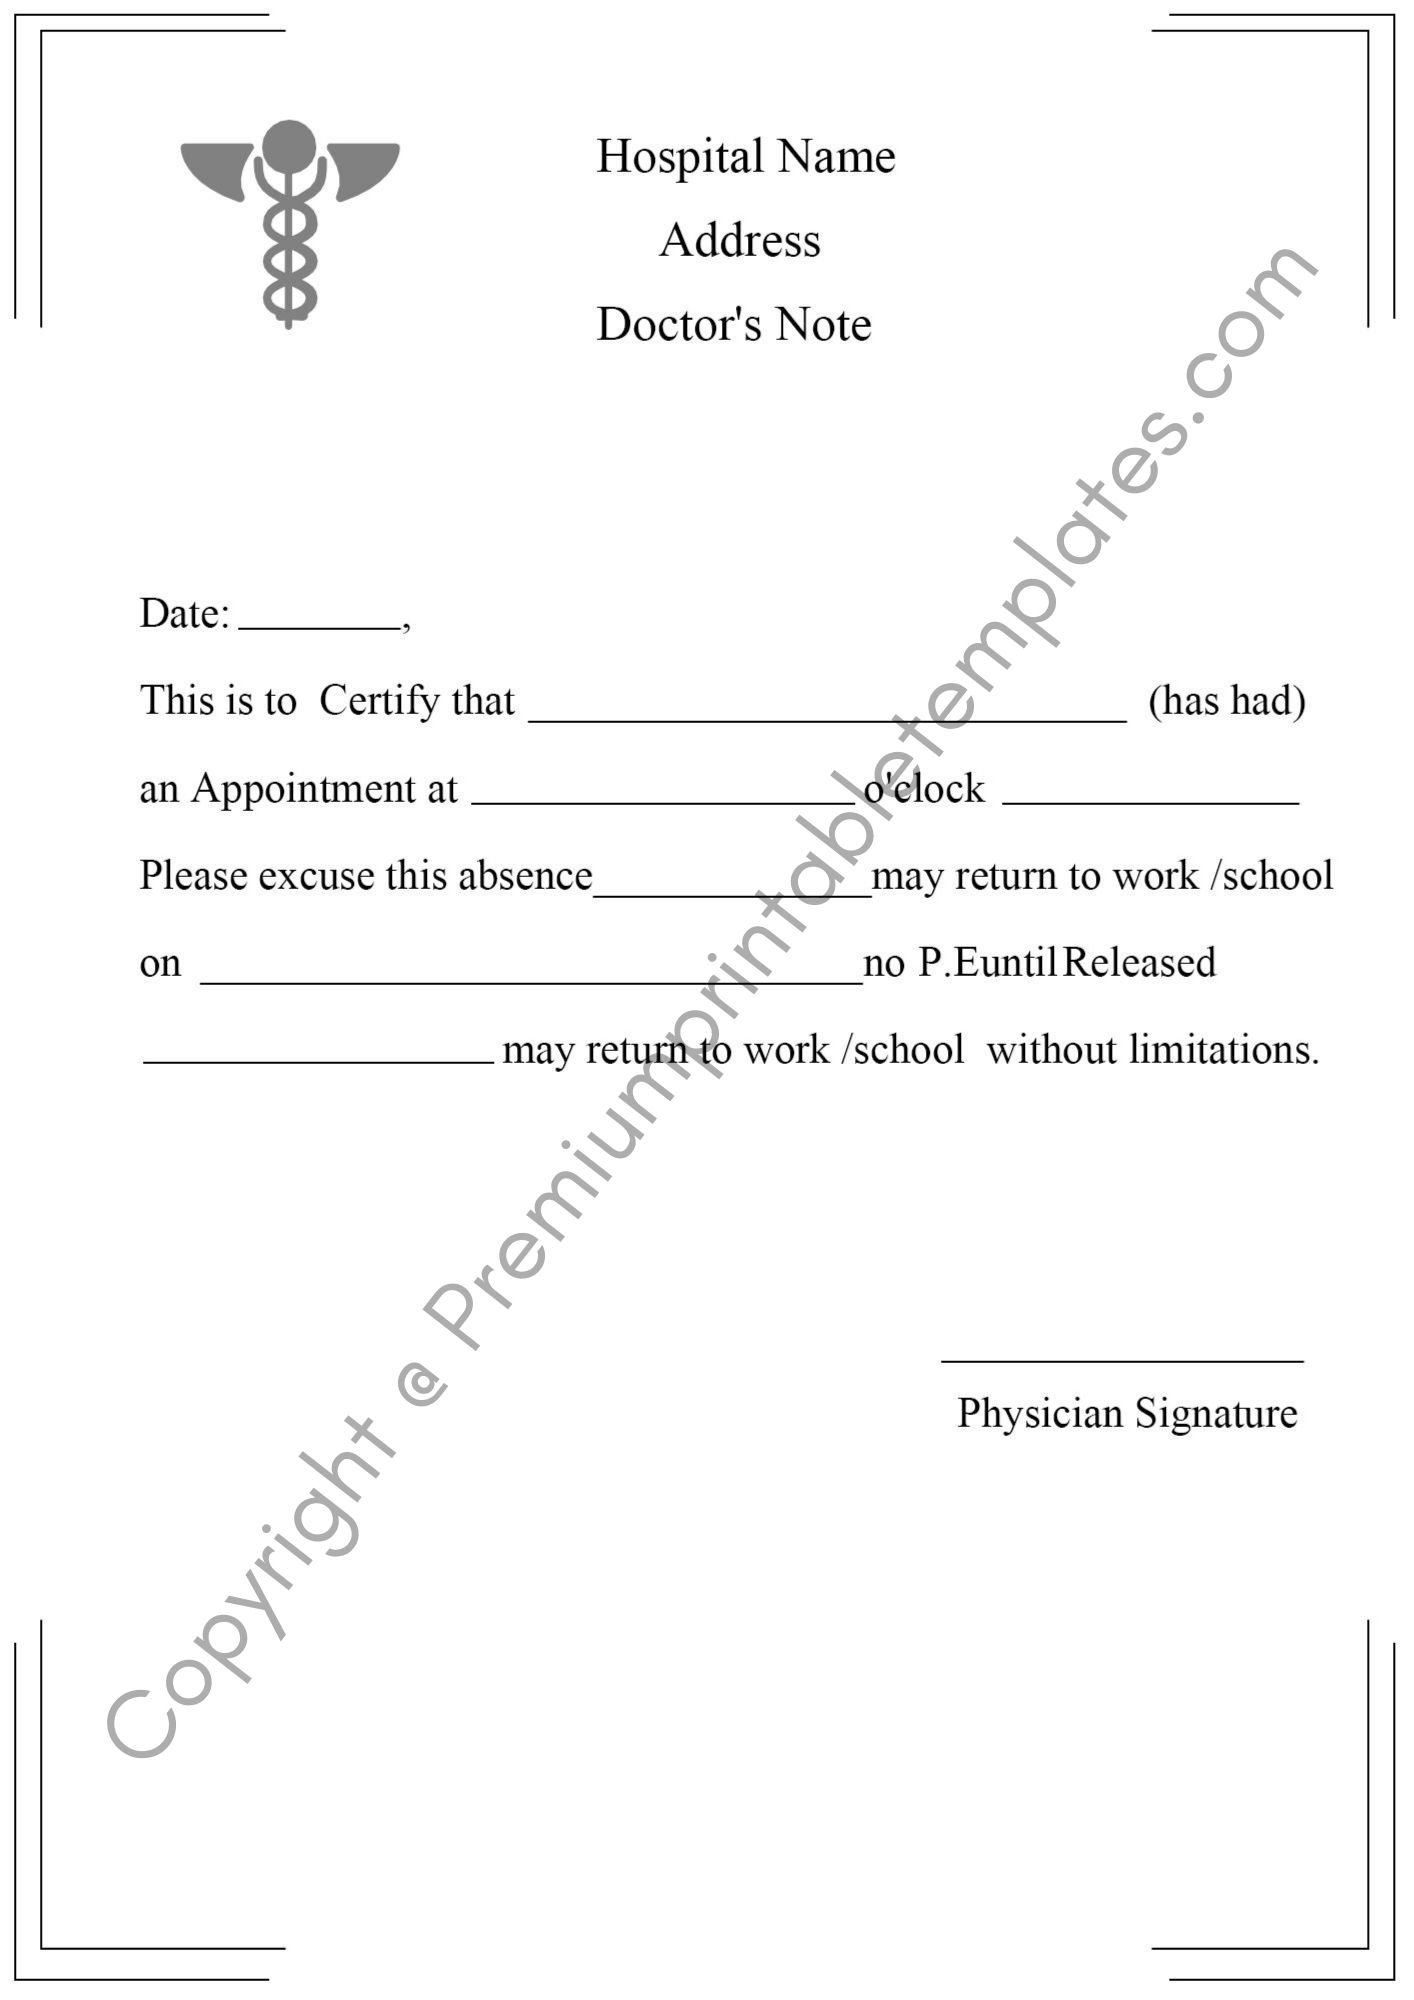 Real Doctors Note For Work  Doctors Note [Pack of 20] In Blank Doctors Note Template